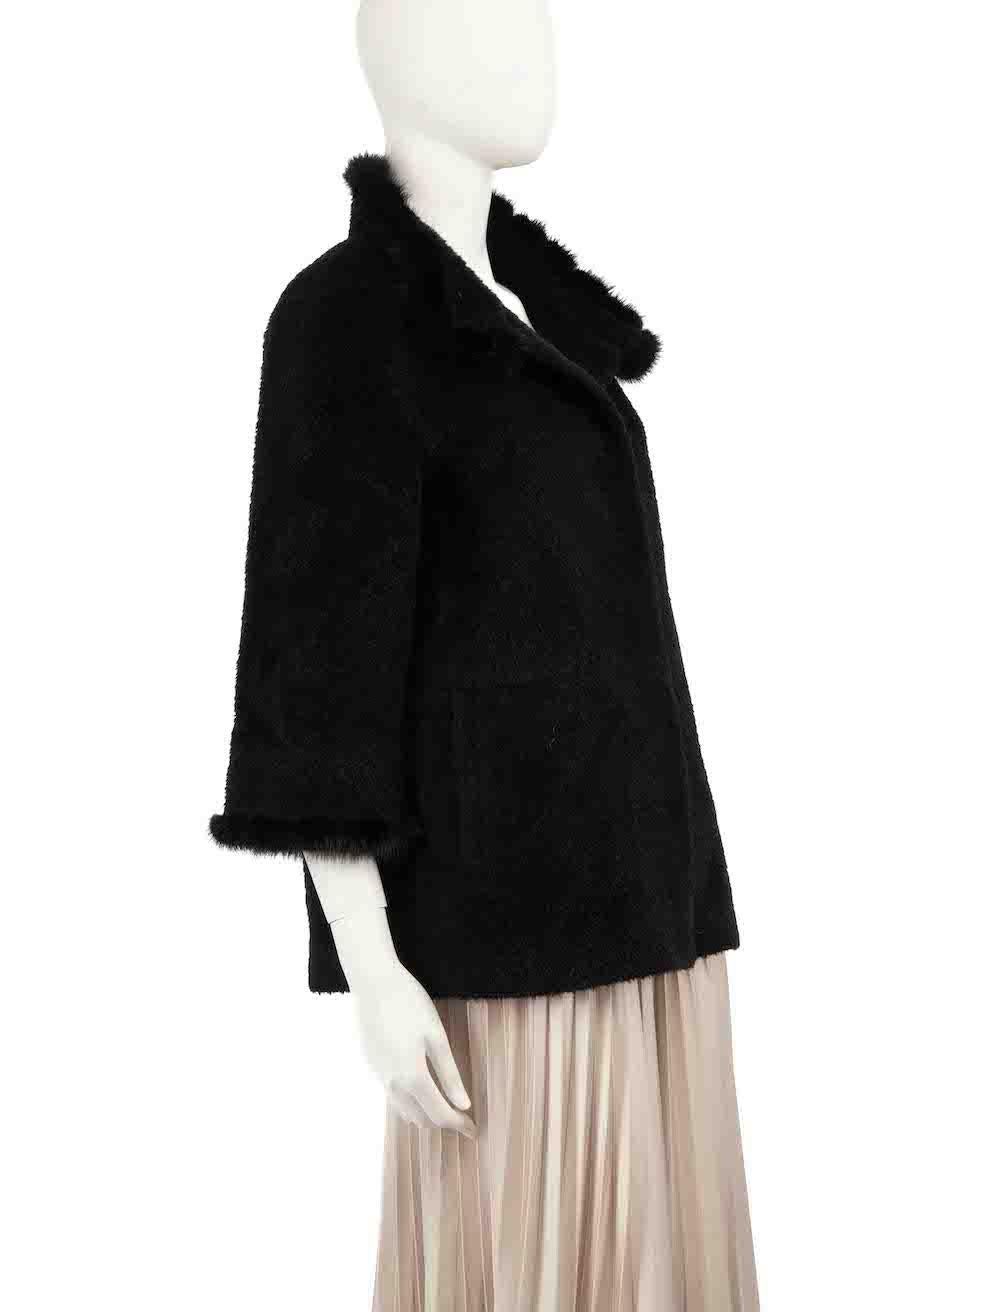 CONDITION is Very good. Hardly any visible wear to coat is evident on this used Cinzia Rocca designer resale item.
 
 
 
 Details
 
 
 Black
 
 Wool
 
 Coat
 
 Mink fur trim
 
 2x Side pockets
 
 Snap button fastening
 
 
 
 
 
 
 
 Composition
 
